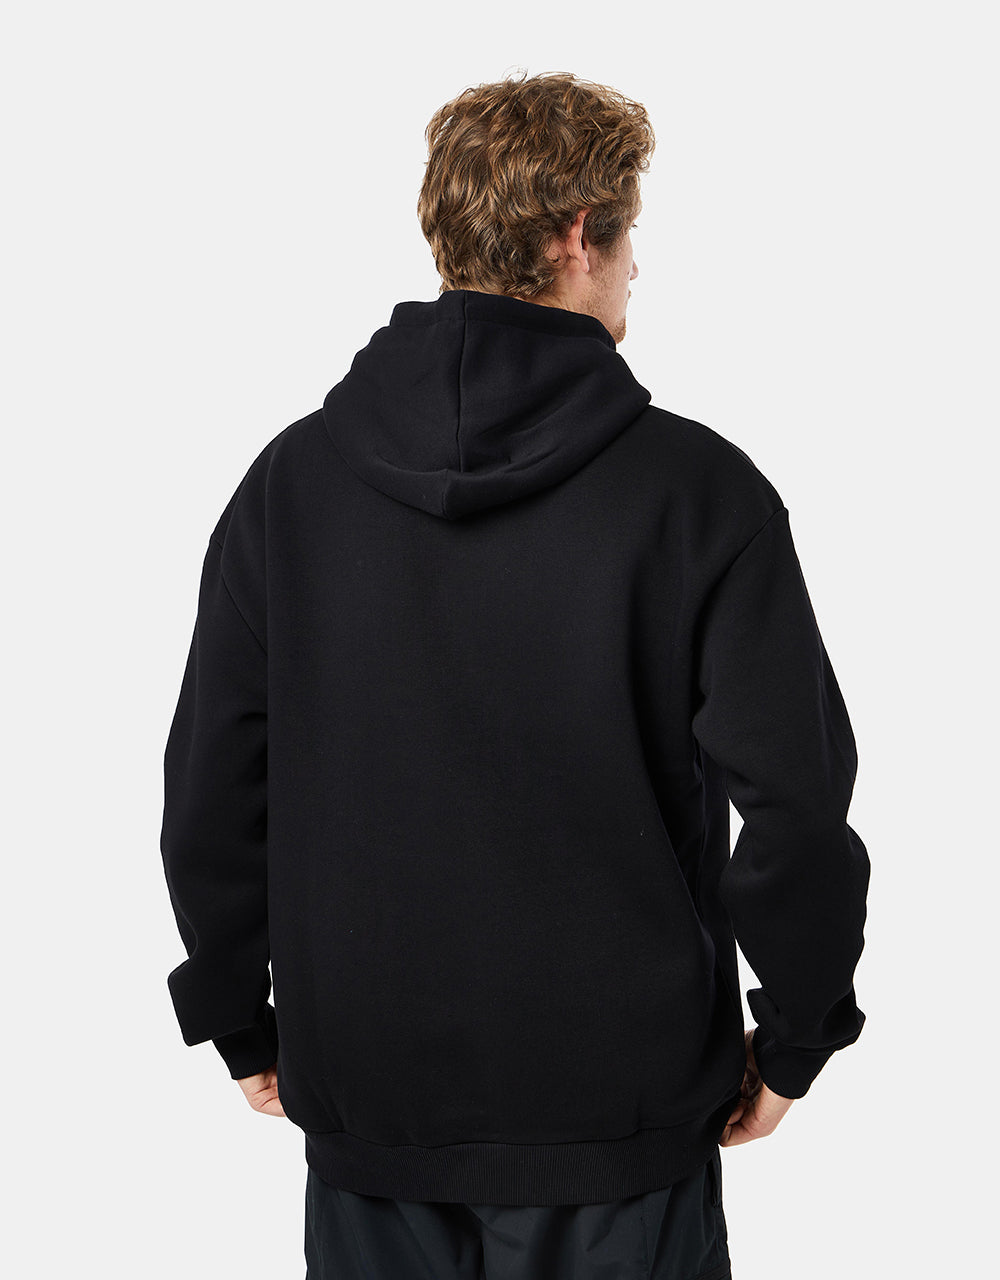 Thrasher x Neck Face Cop Car Pullover Hoodie - Black